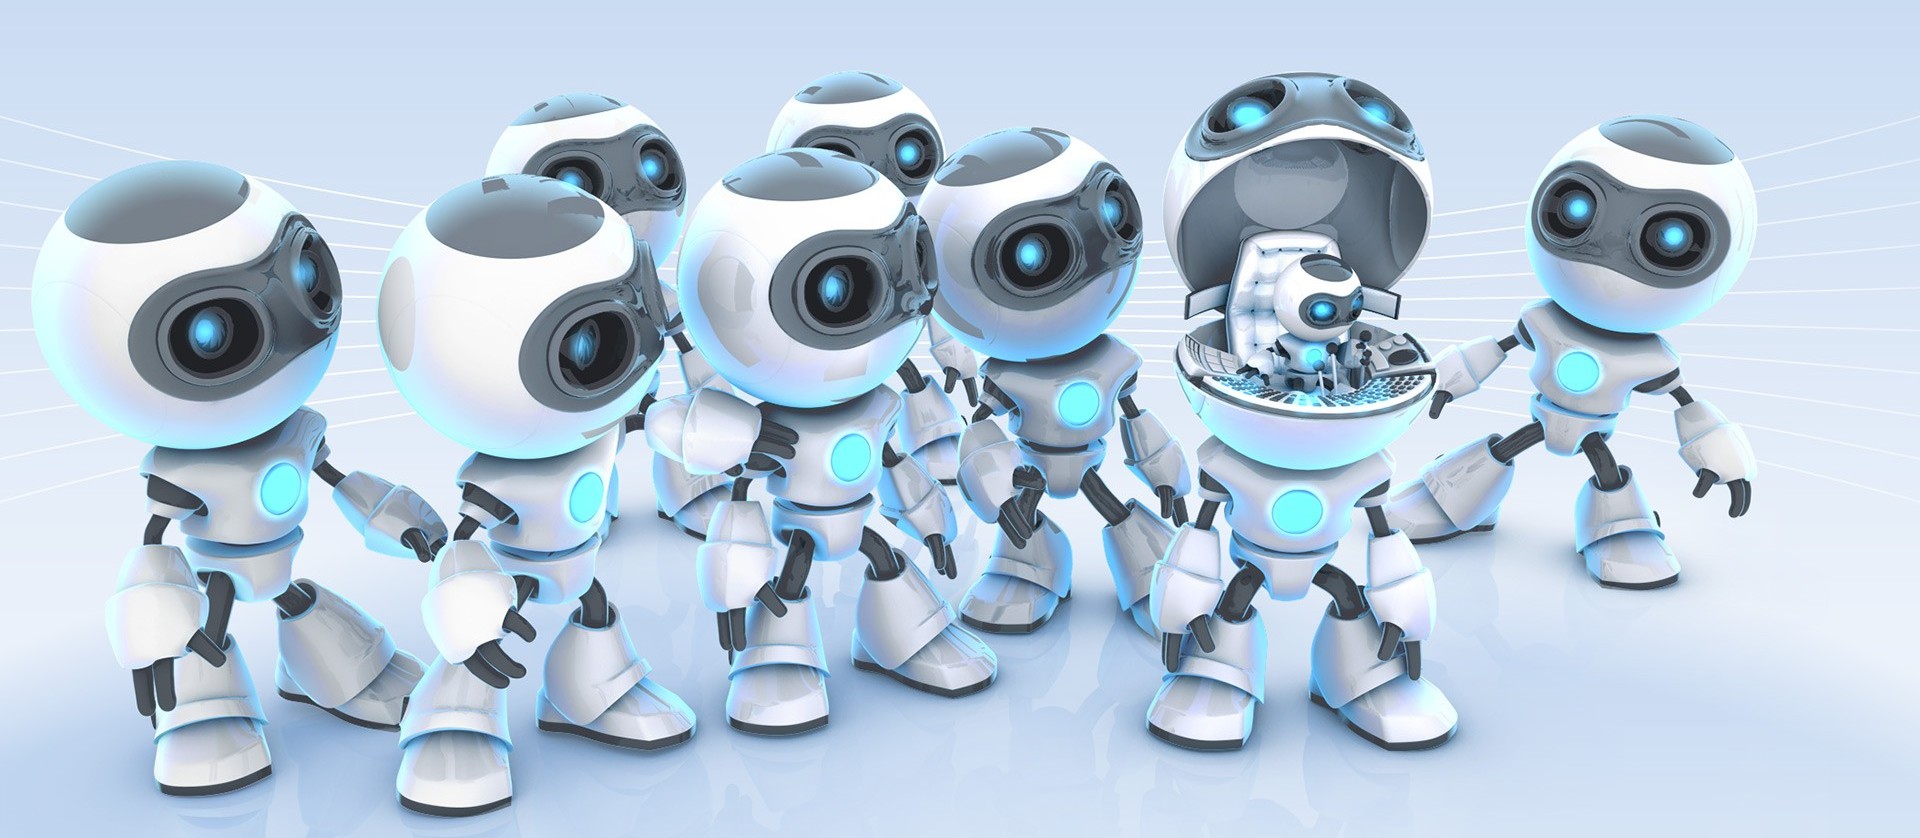 Nice Images Collection: Robots Desktop Wallpapers